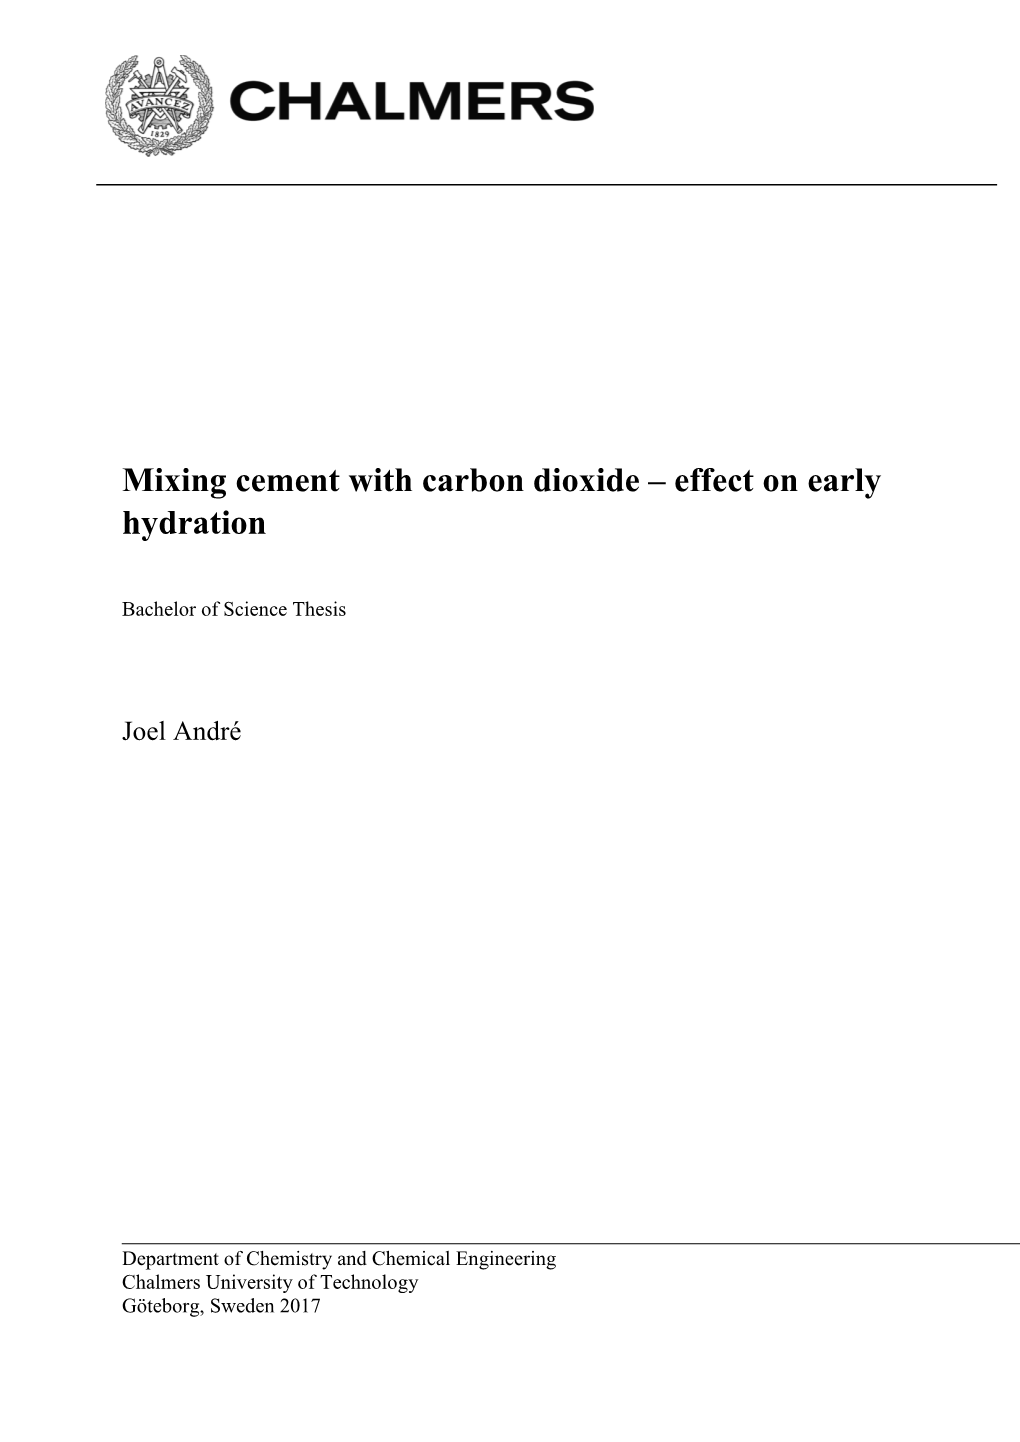 Mixing Cement with Carbon Dioxide – Effect on Early Hydration